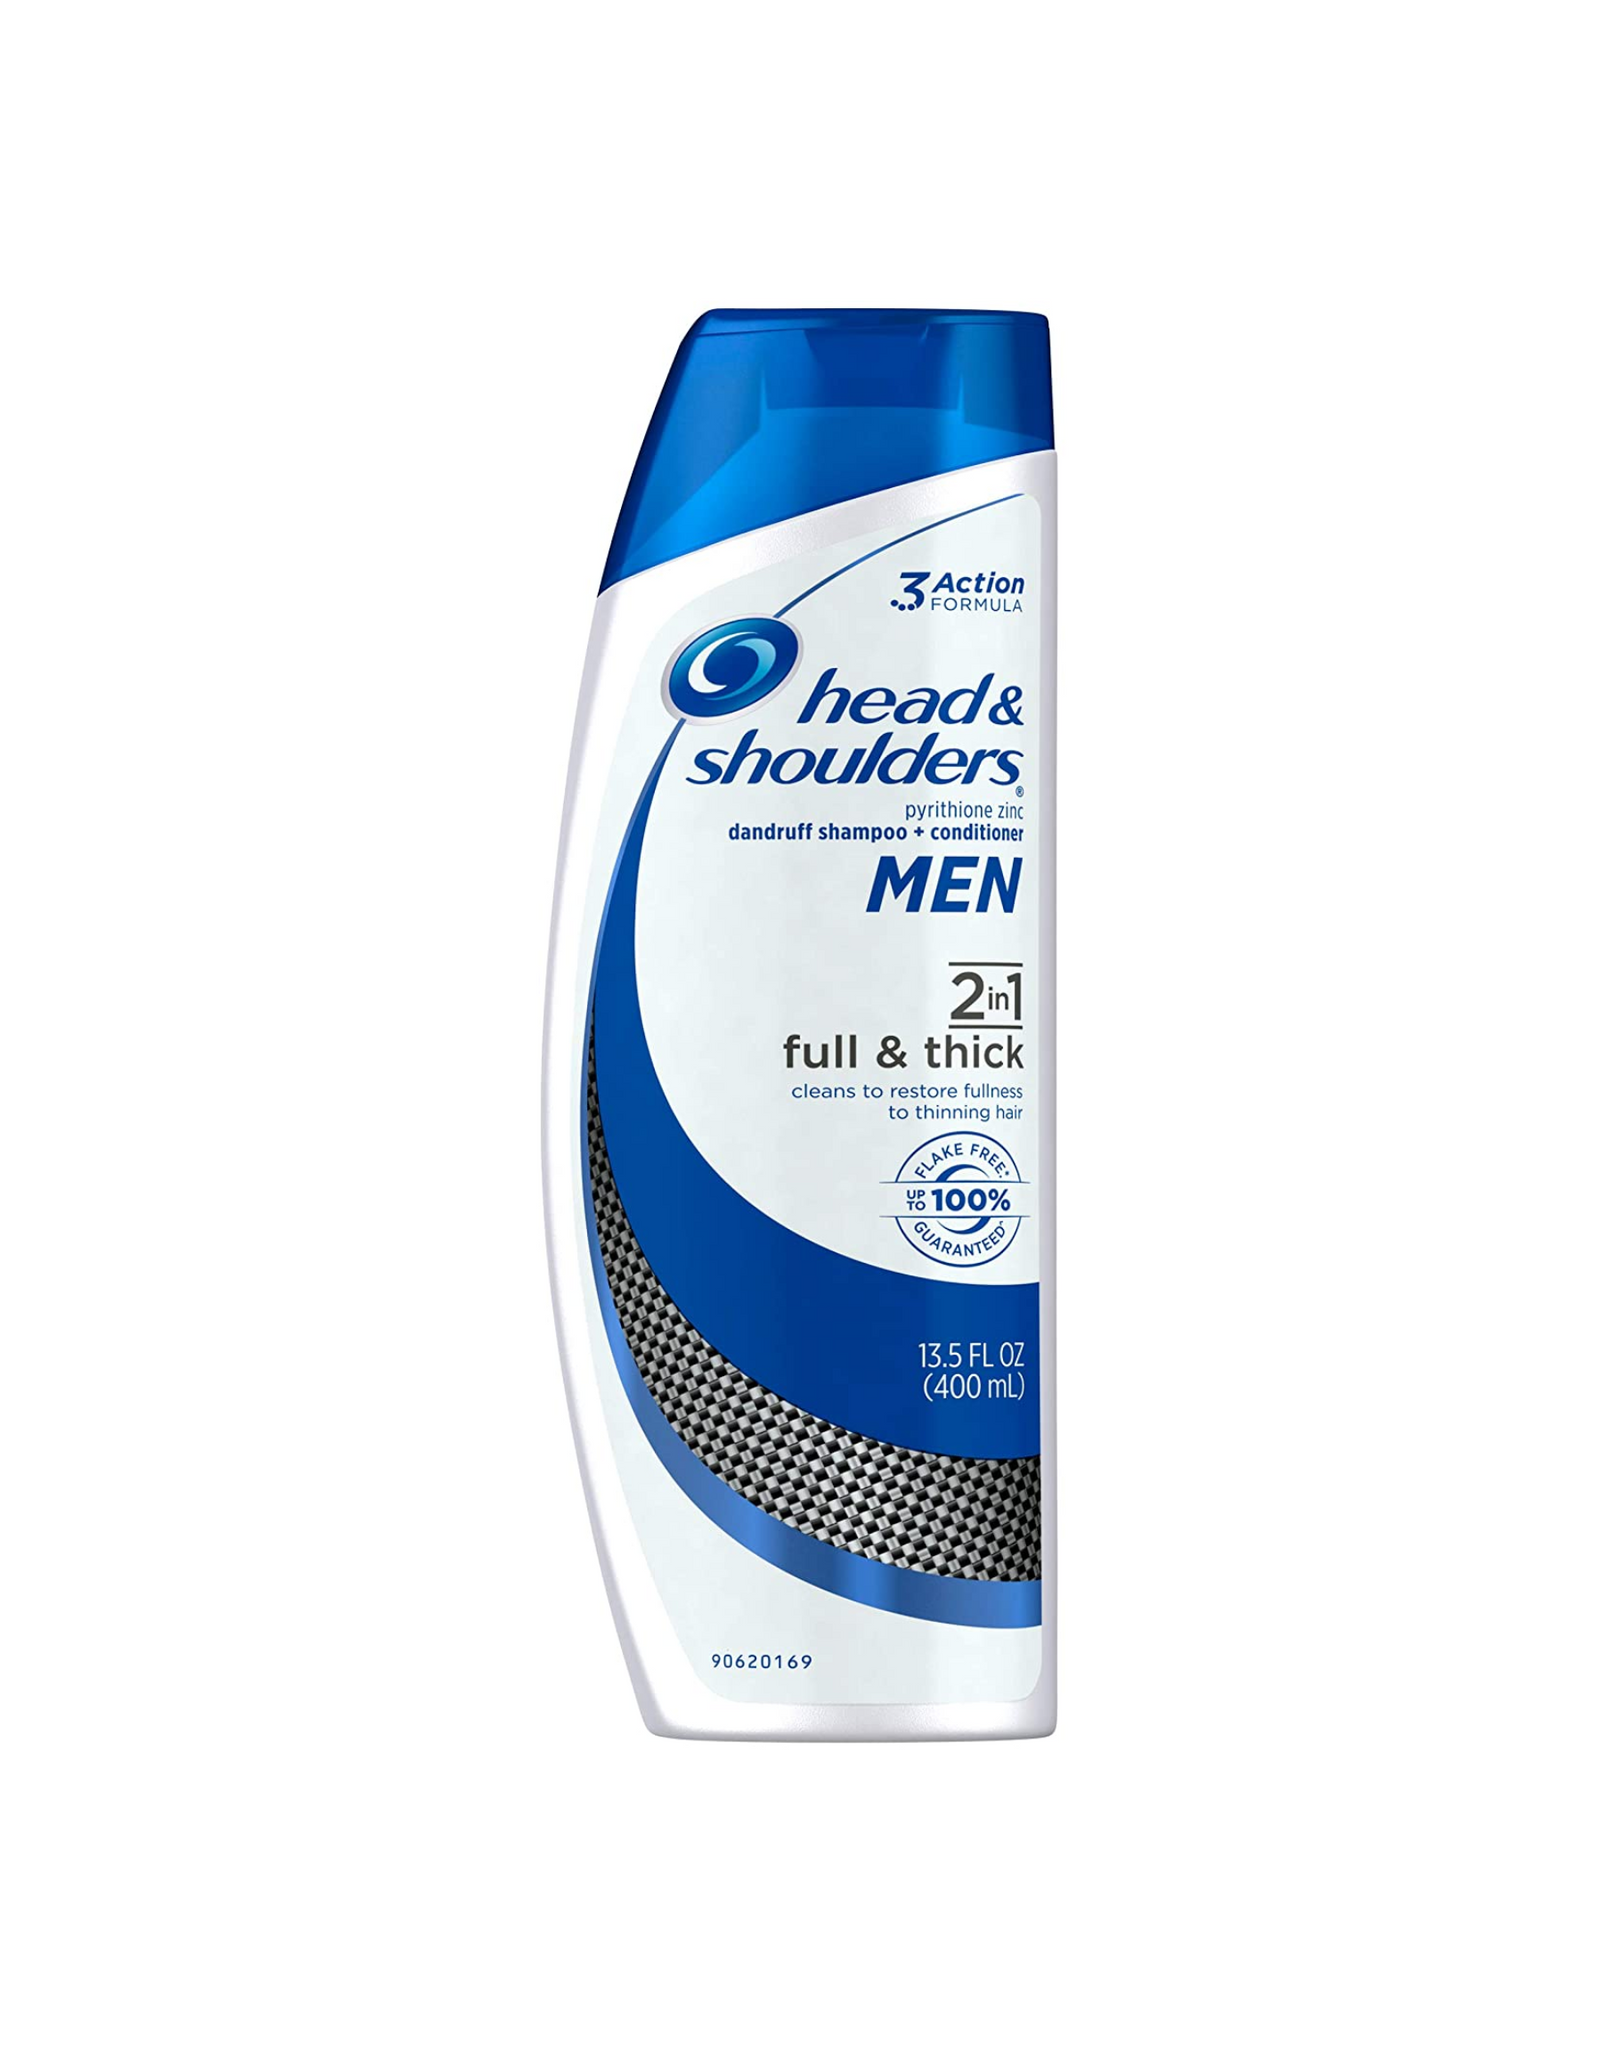 Head Shoulders 2 in 1 Full and Thick For Men, Dandruff + Shampoo Conditioner 13.5 fl oz (Pack of 2)